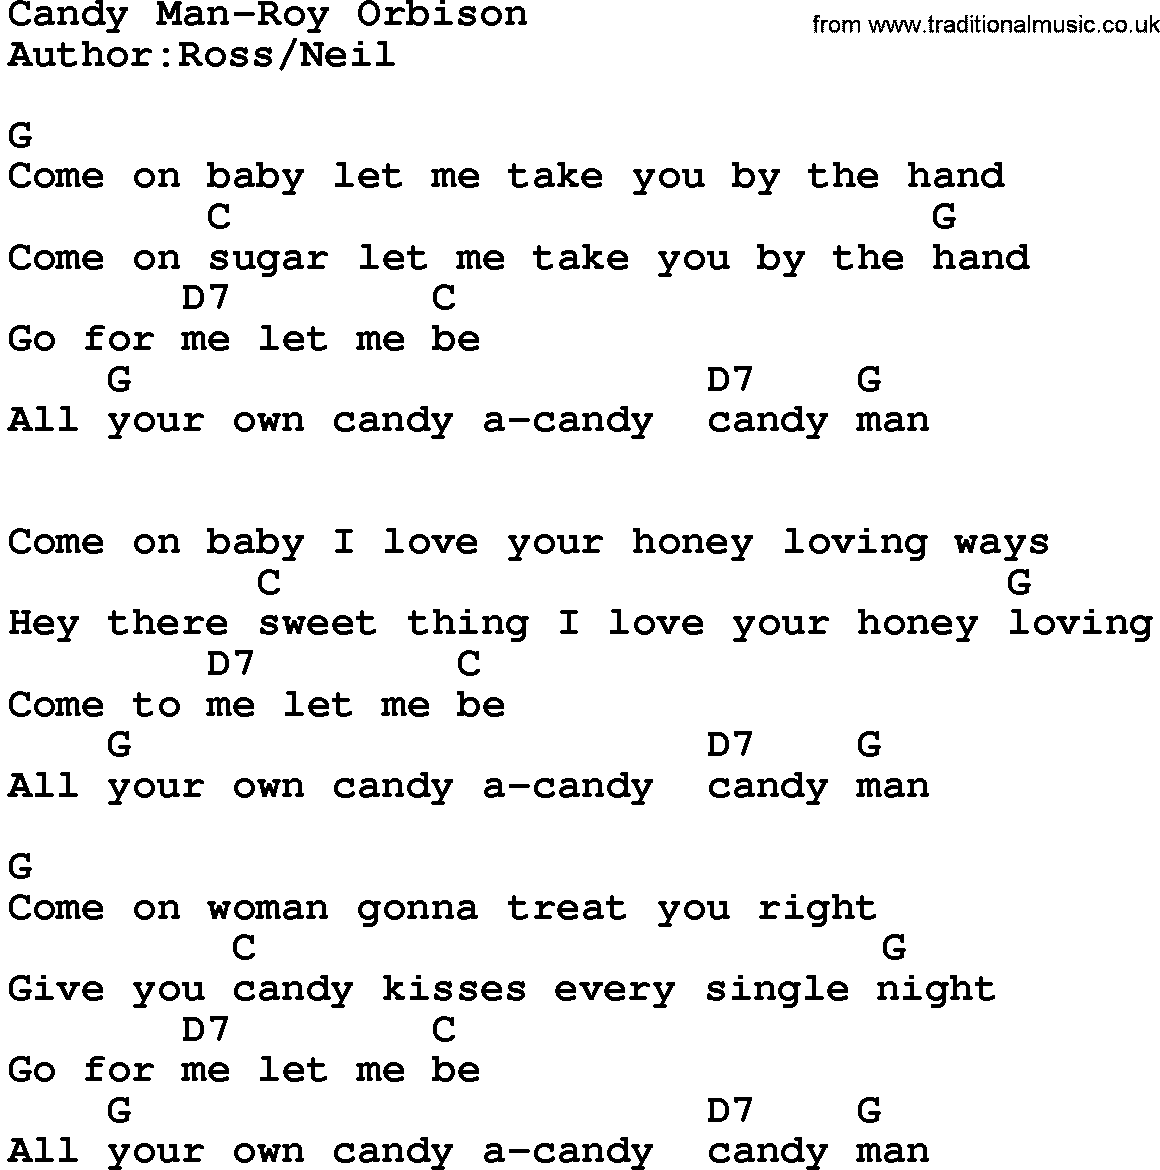 Country music song: Candy Man-Roy Orbison lyrics and chords